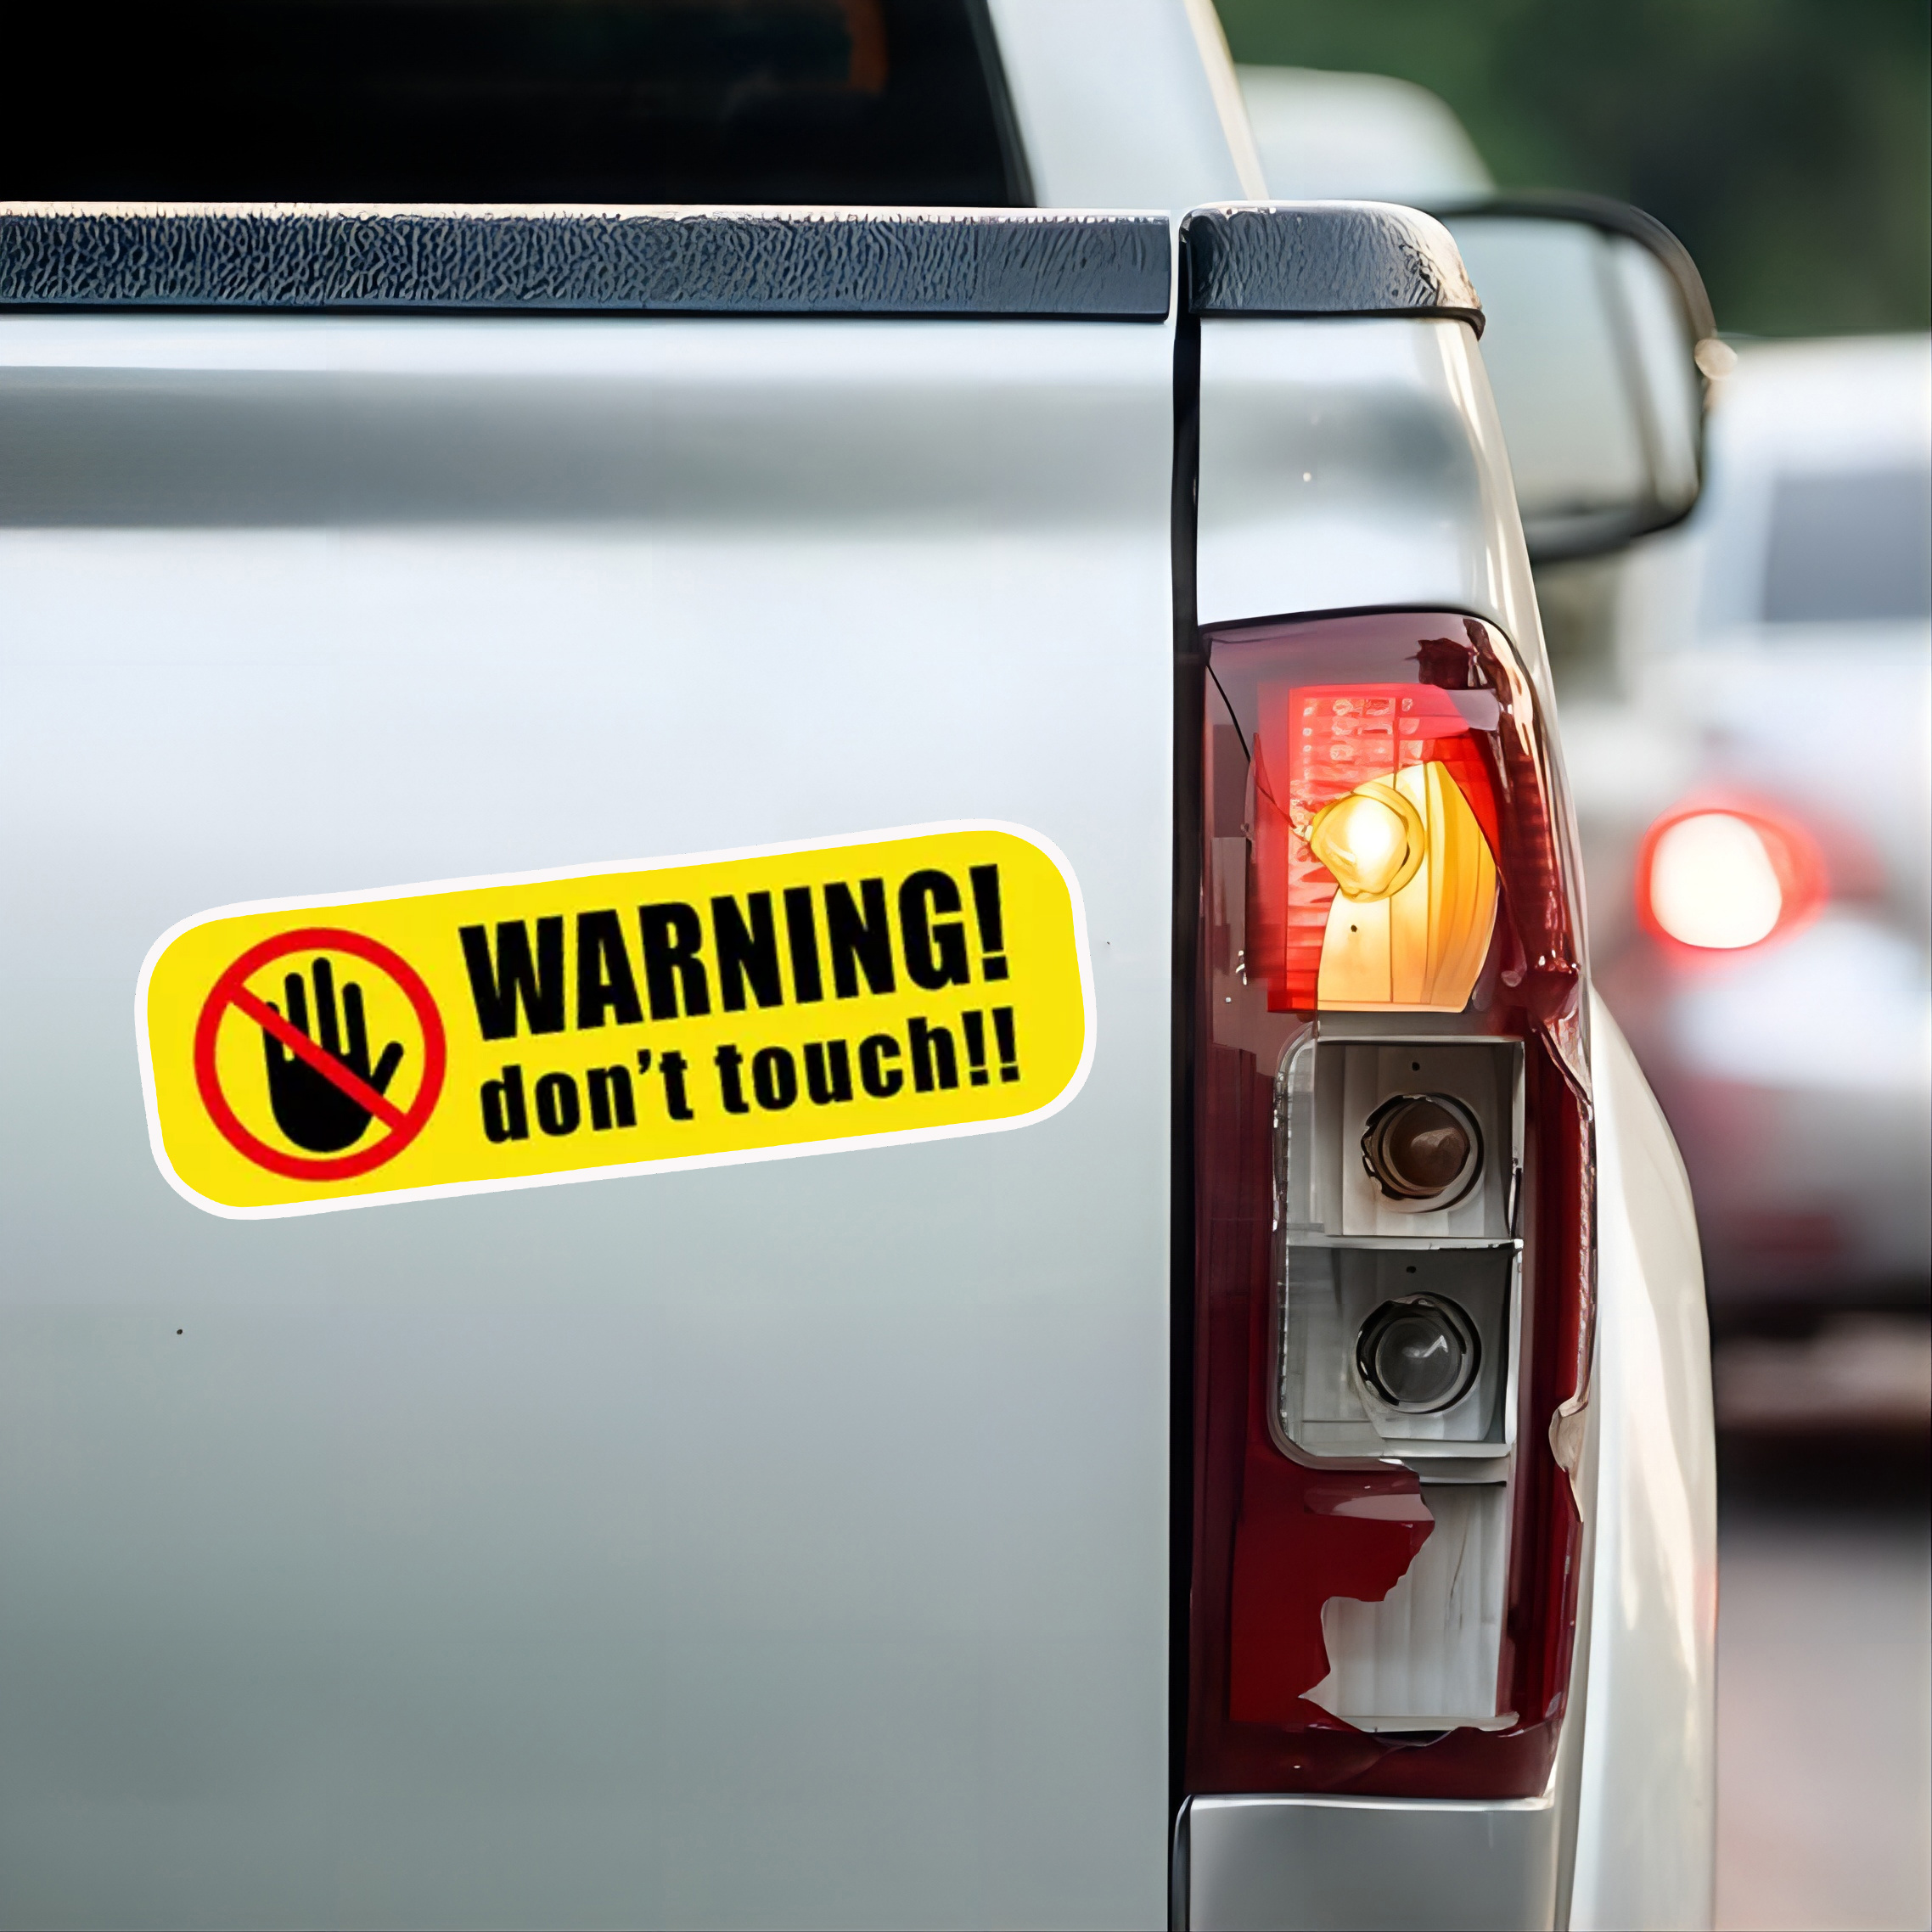 2 pcs Funny Vehicle Safety Warning Car Rules Sticker Decal, 4 inches -  Adhesive Vinyl for Car Truck Window Bumper